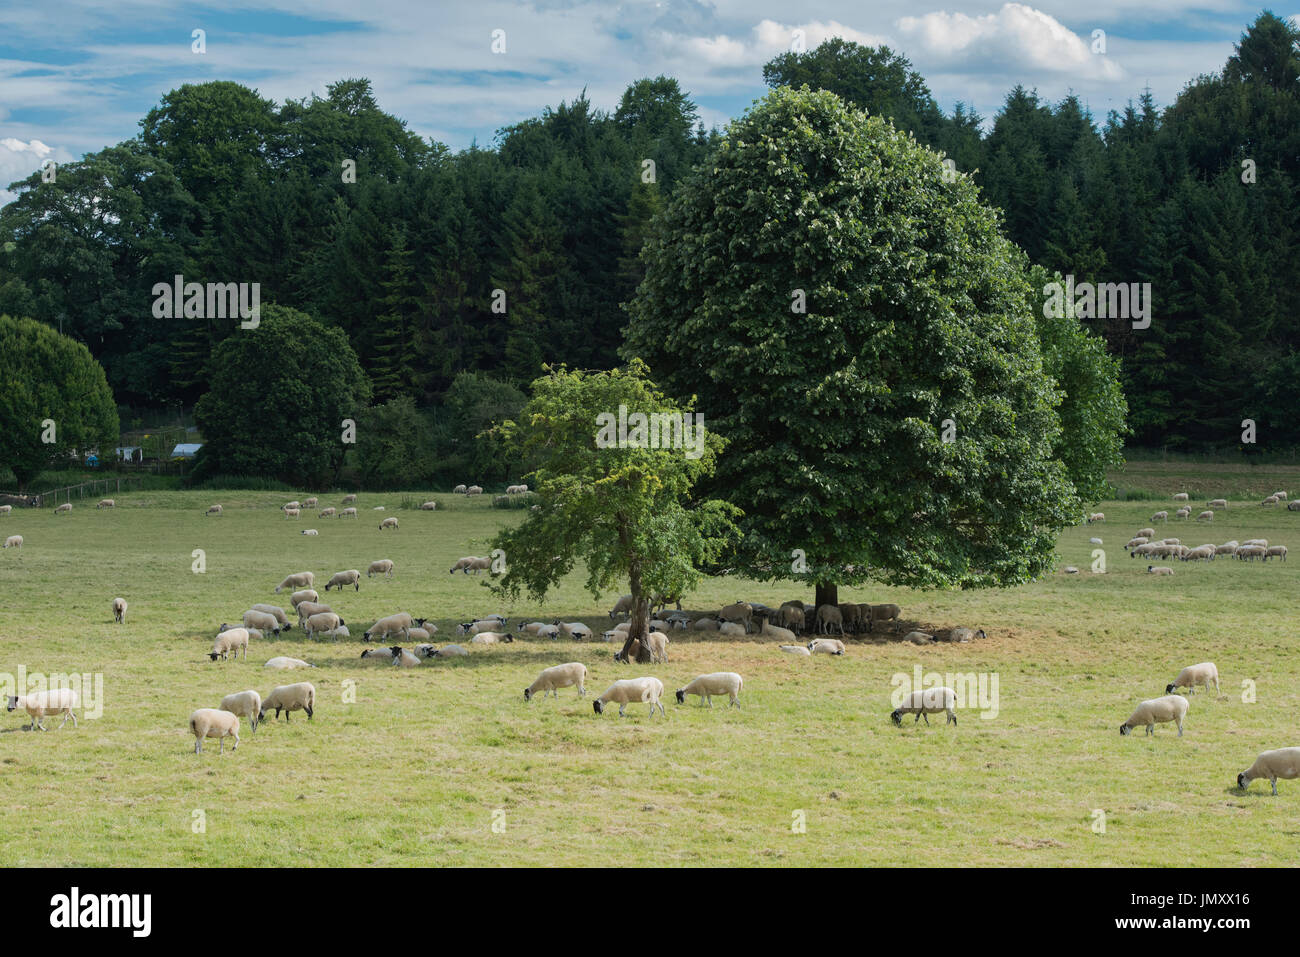 Sheep in a field being shaded by trees. Yanworth, Cotswolds, Gloucestershire, England Stock Photo